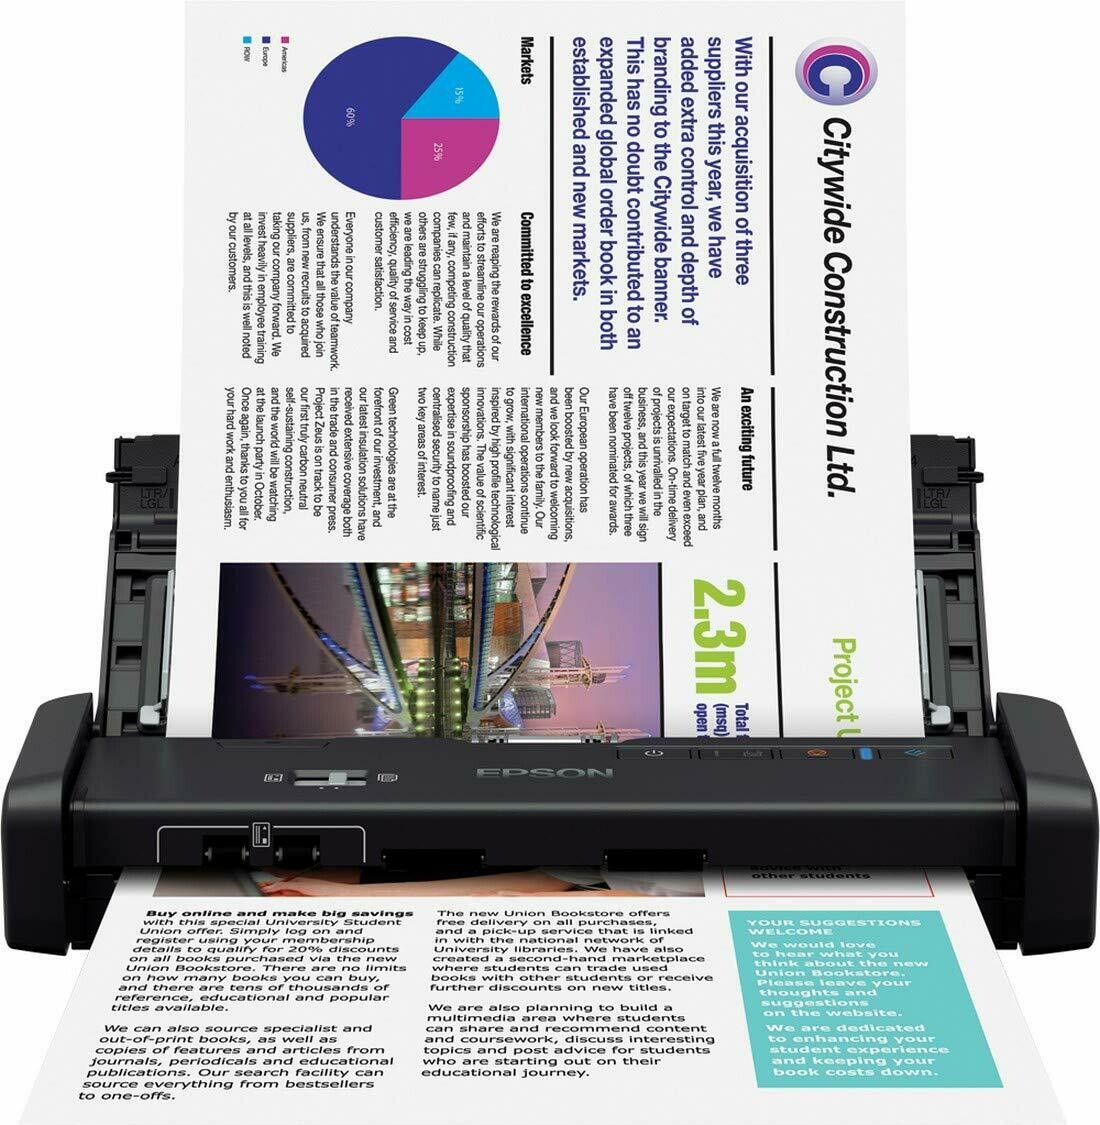 Epson DS-310 Sheet Feed Scanner